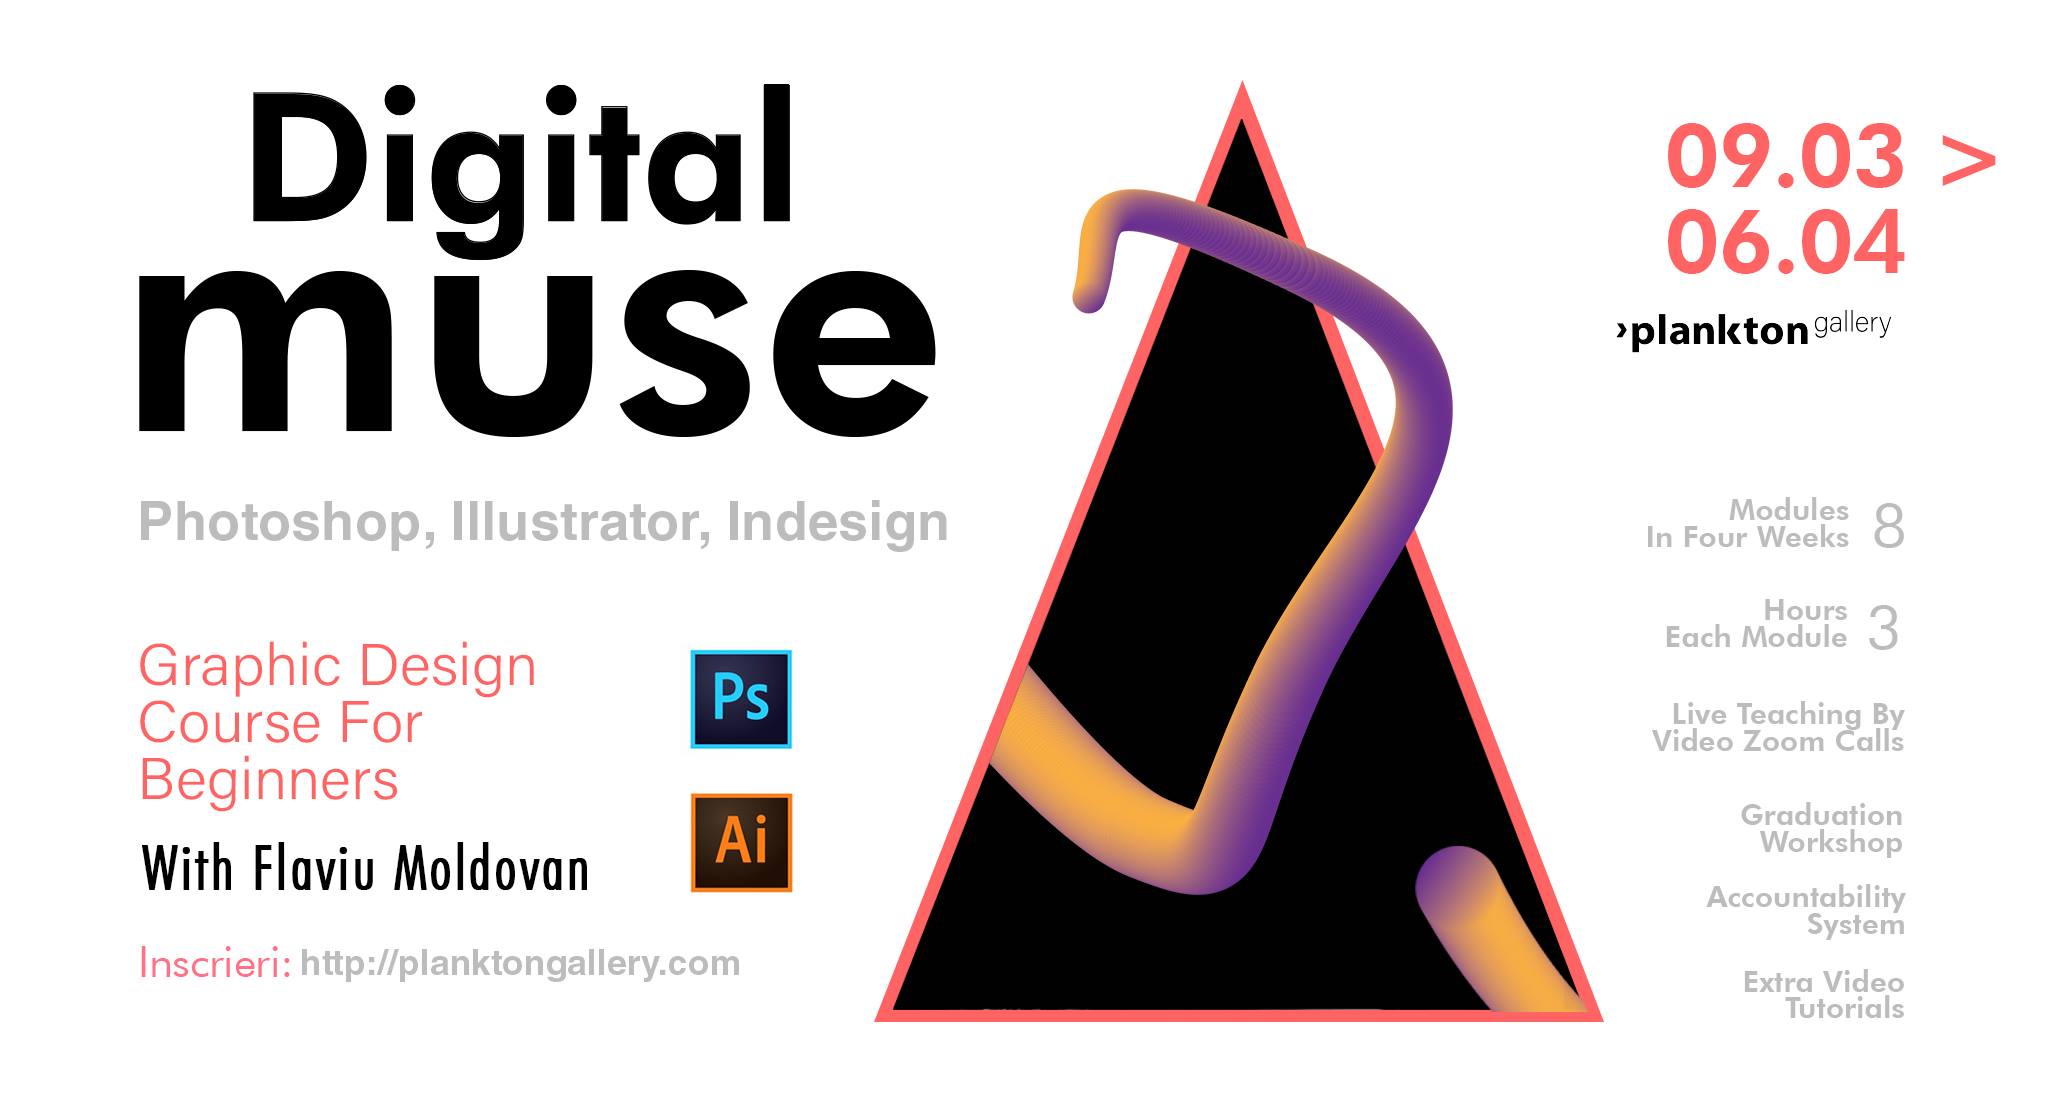 Digital Muse – Graphic Design Course for Beginners